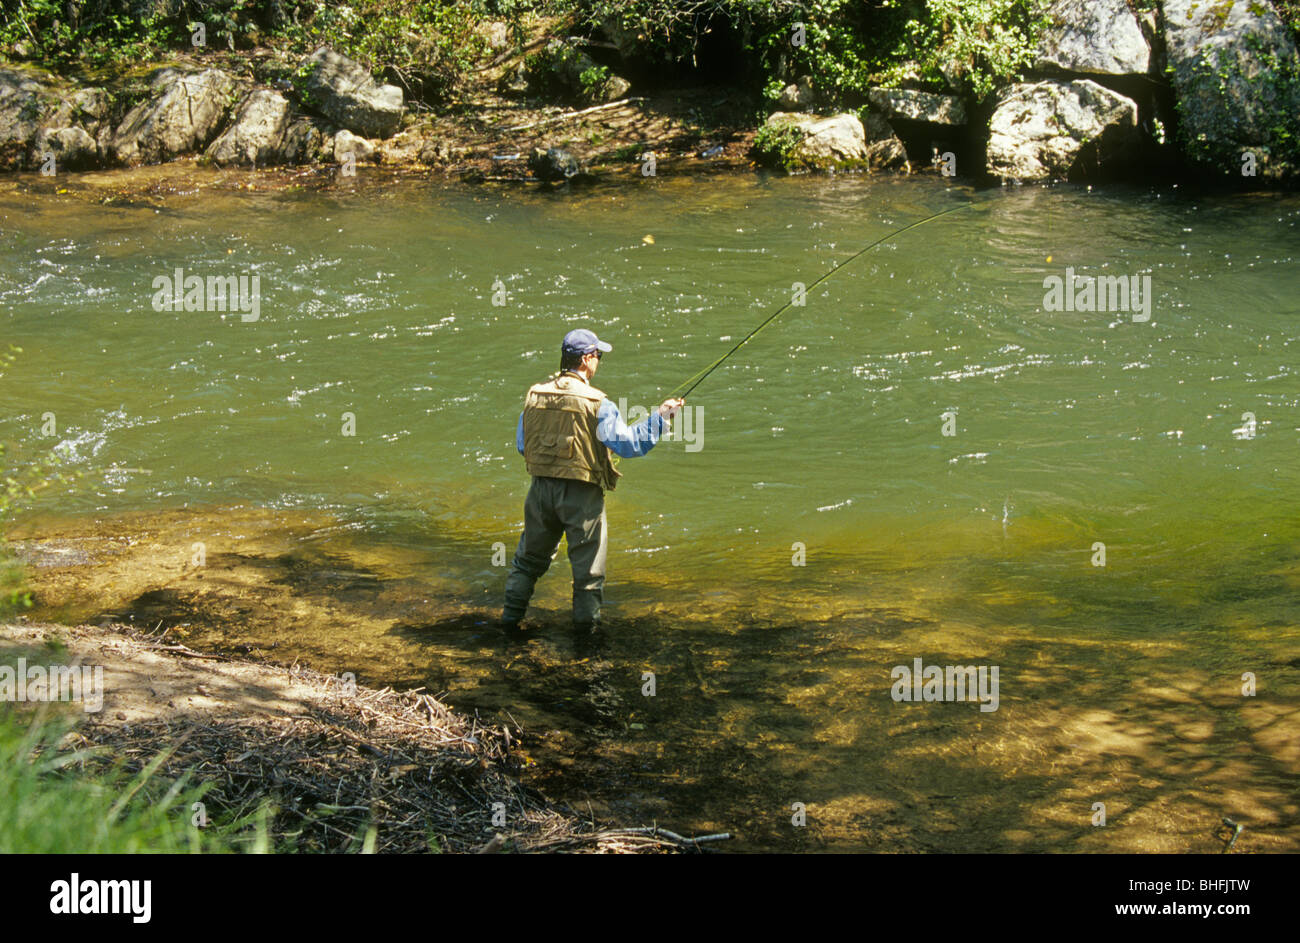 Fly fishing for rainbow trout on the Chattahoochee River in northern Georgia Stock Photo